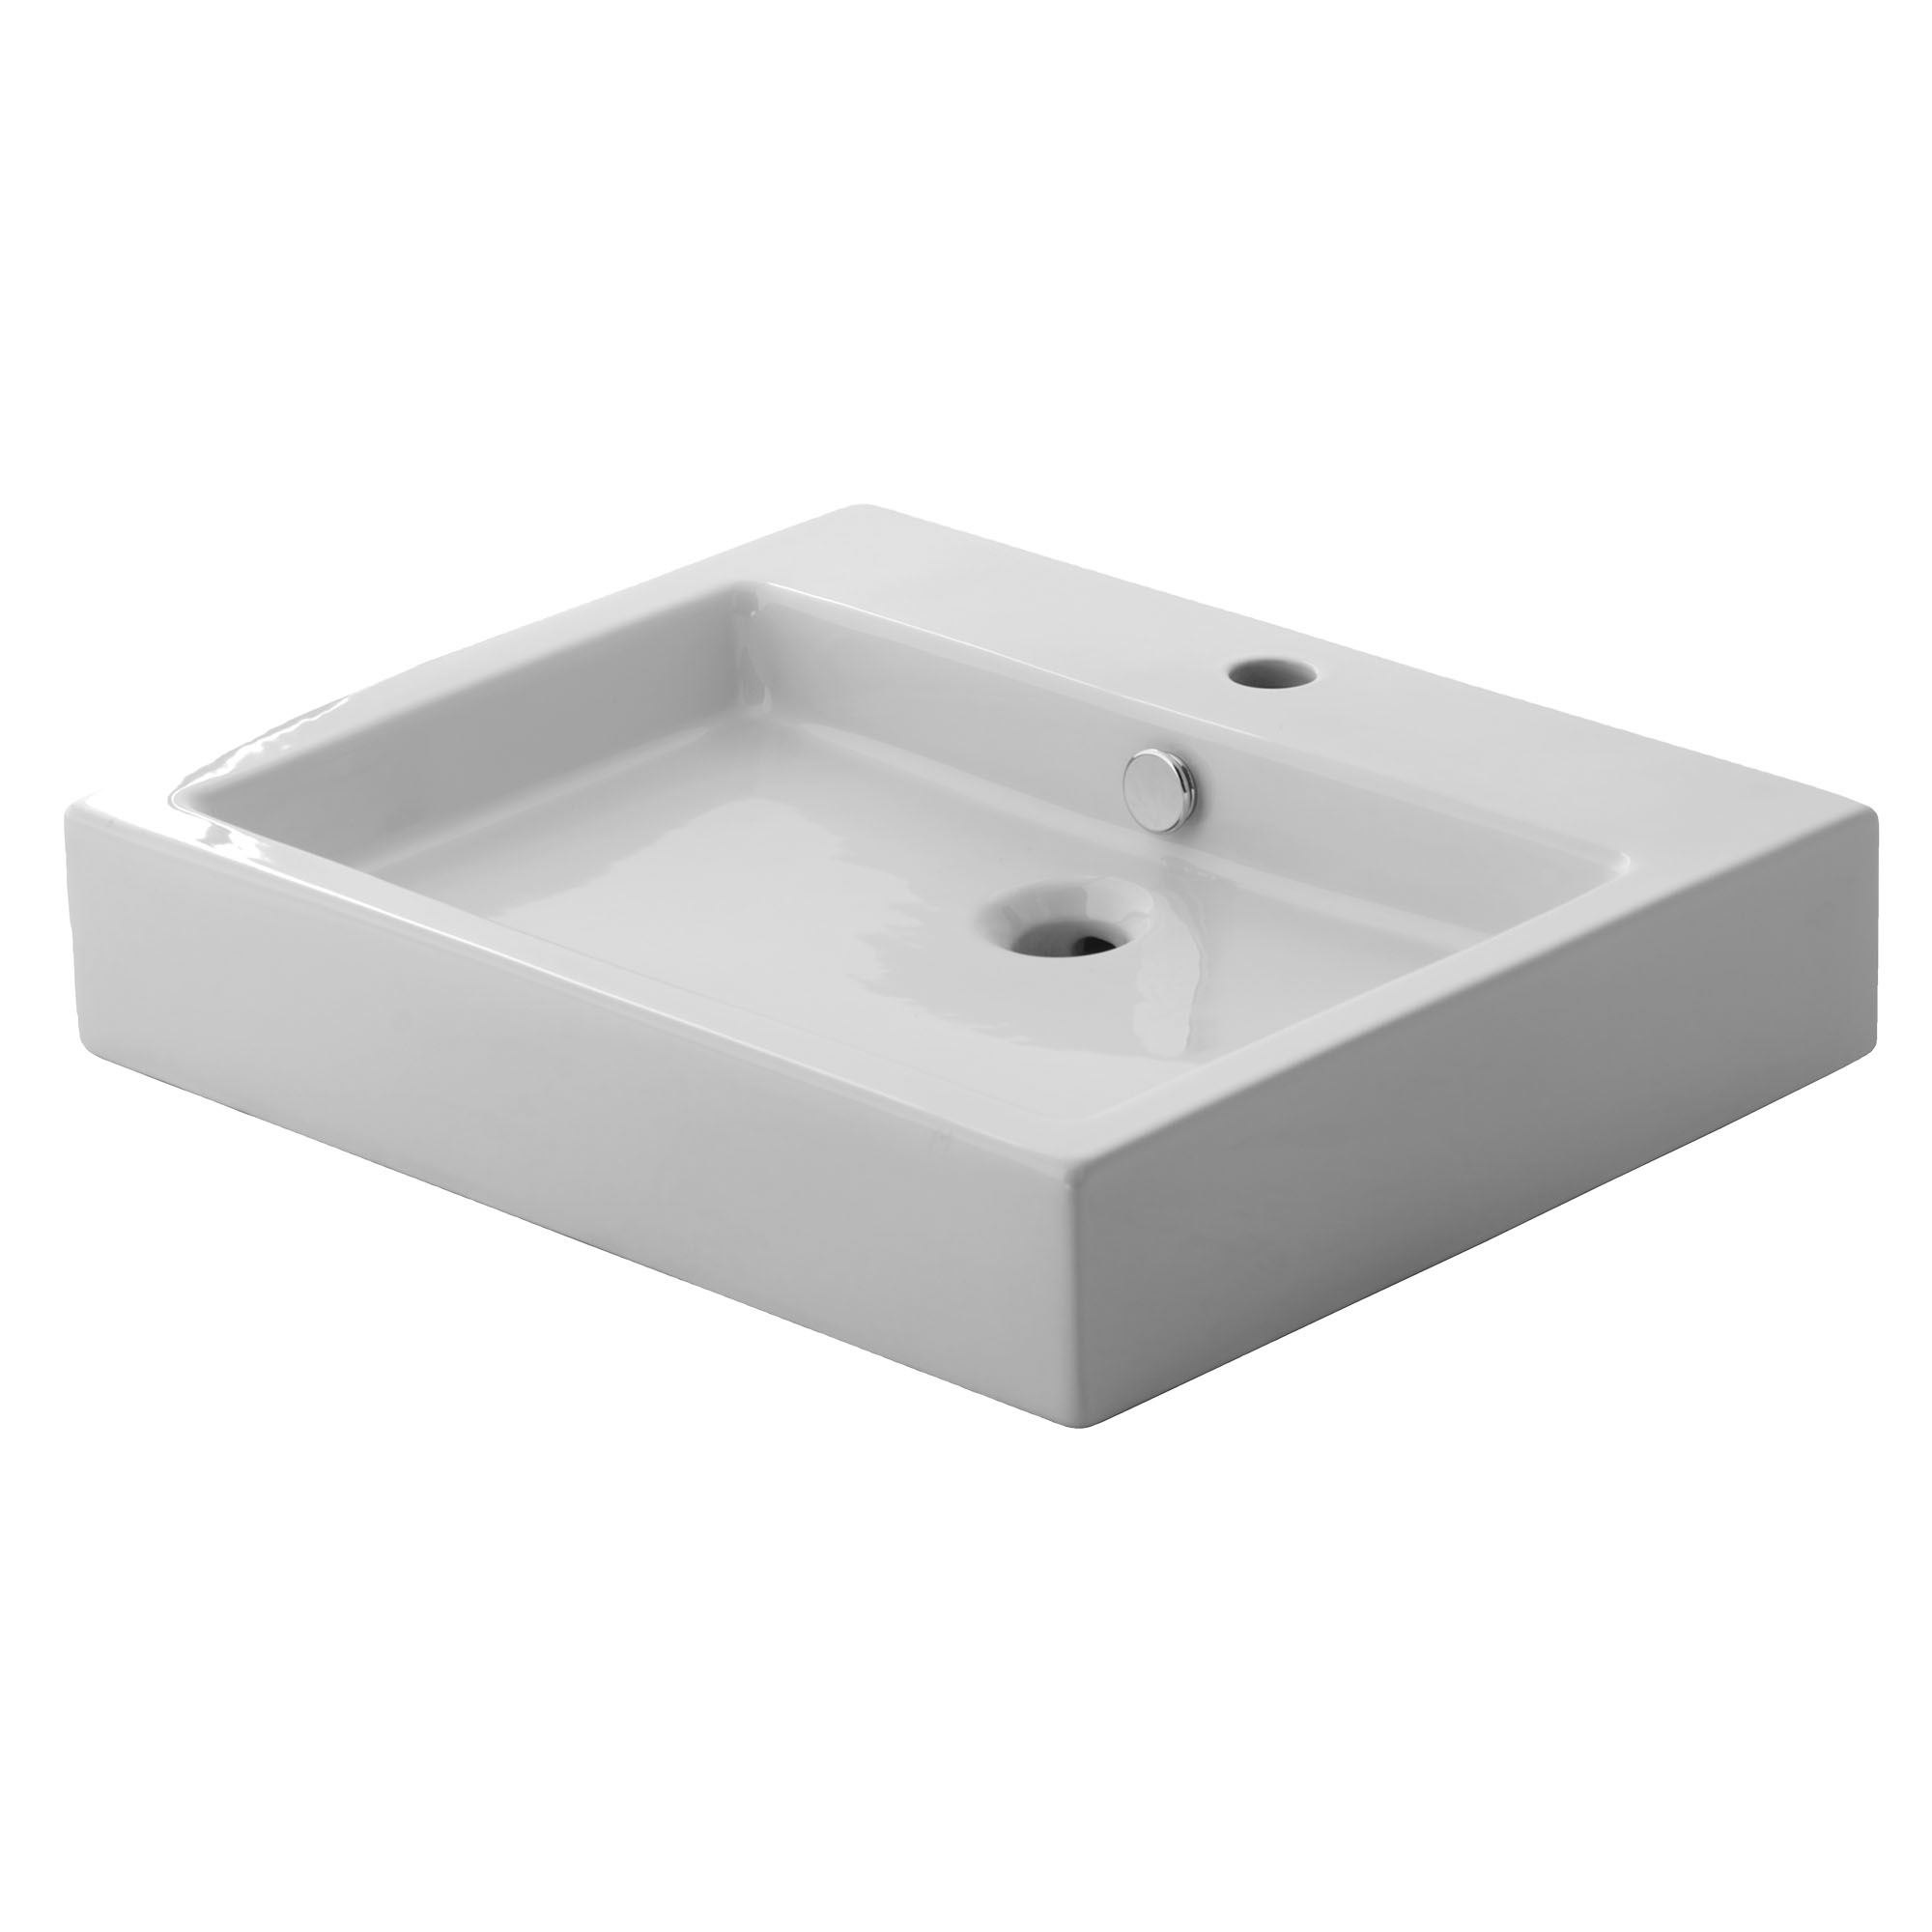 Studio® 22 x 18-1/2-Inch Above Counter Sink With Center Hole Only